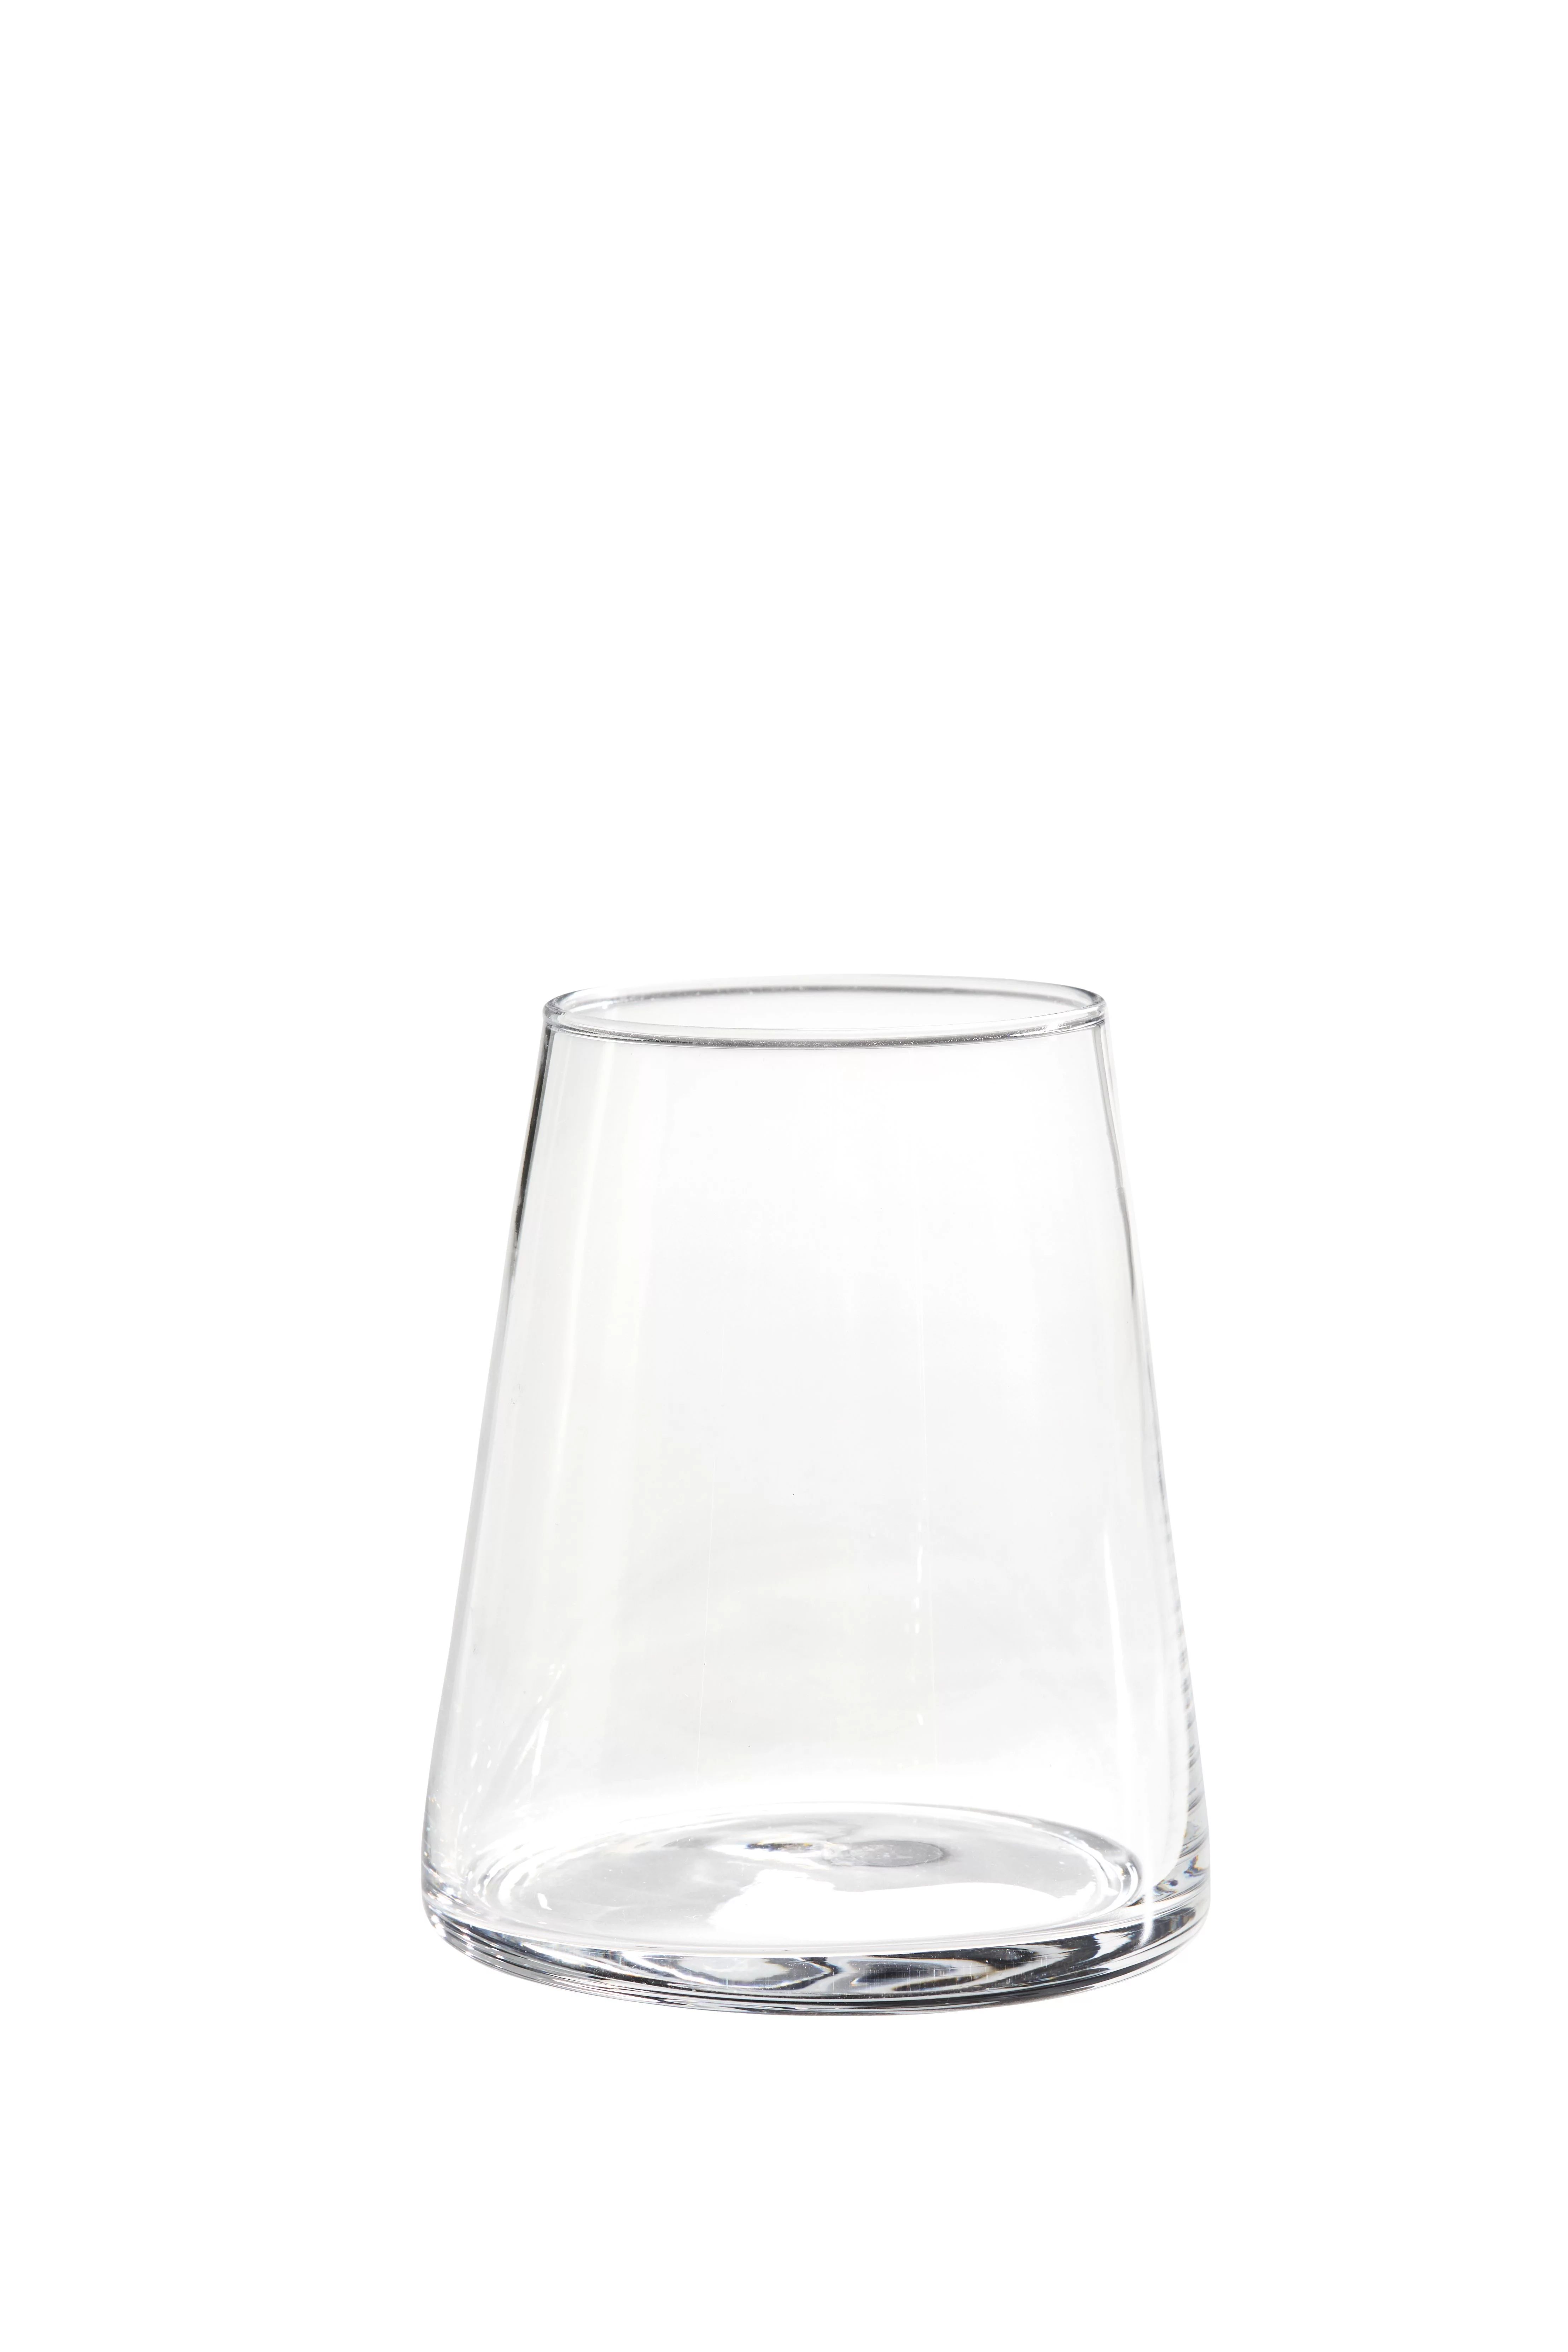 Better Homes & Gardens Clear Flared Stemless Wine Glass, 4 Pack | Walmart (US)